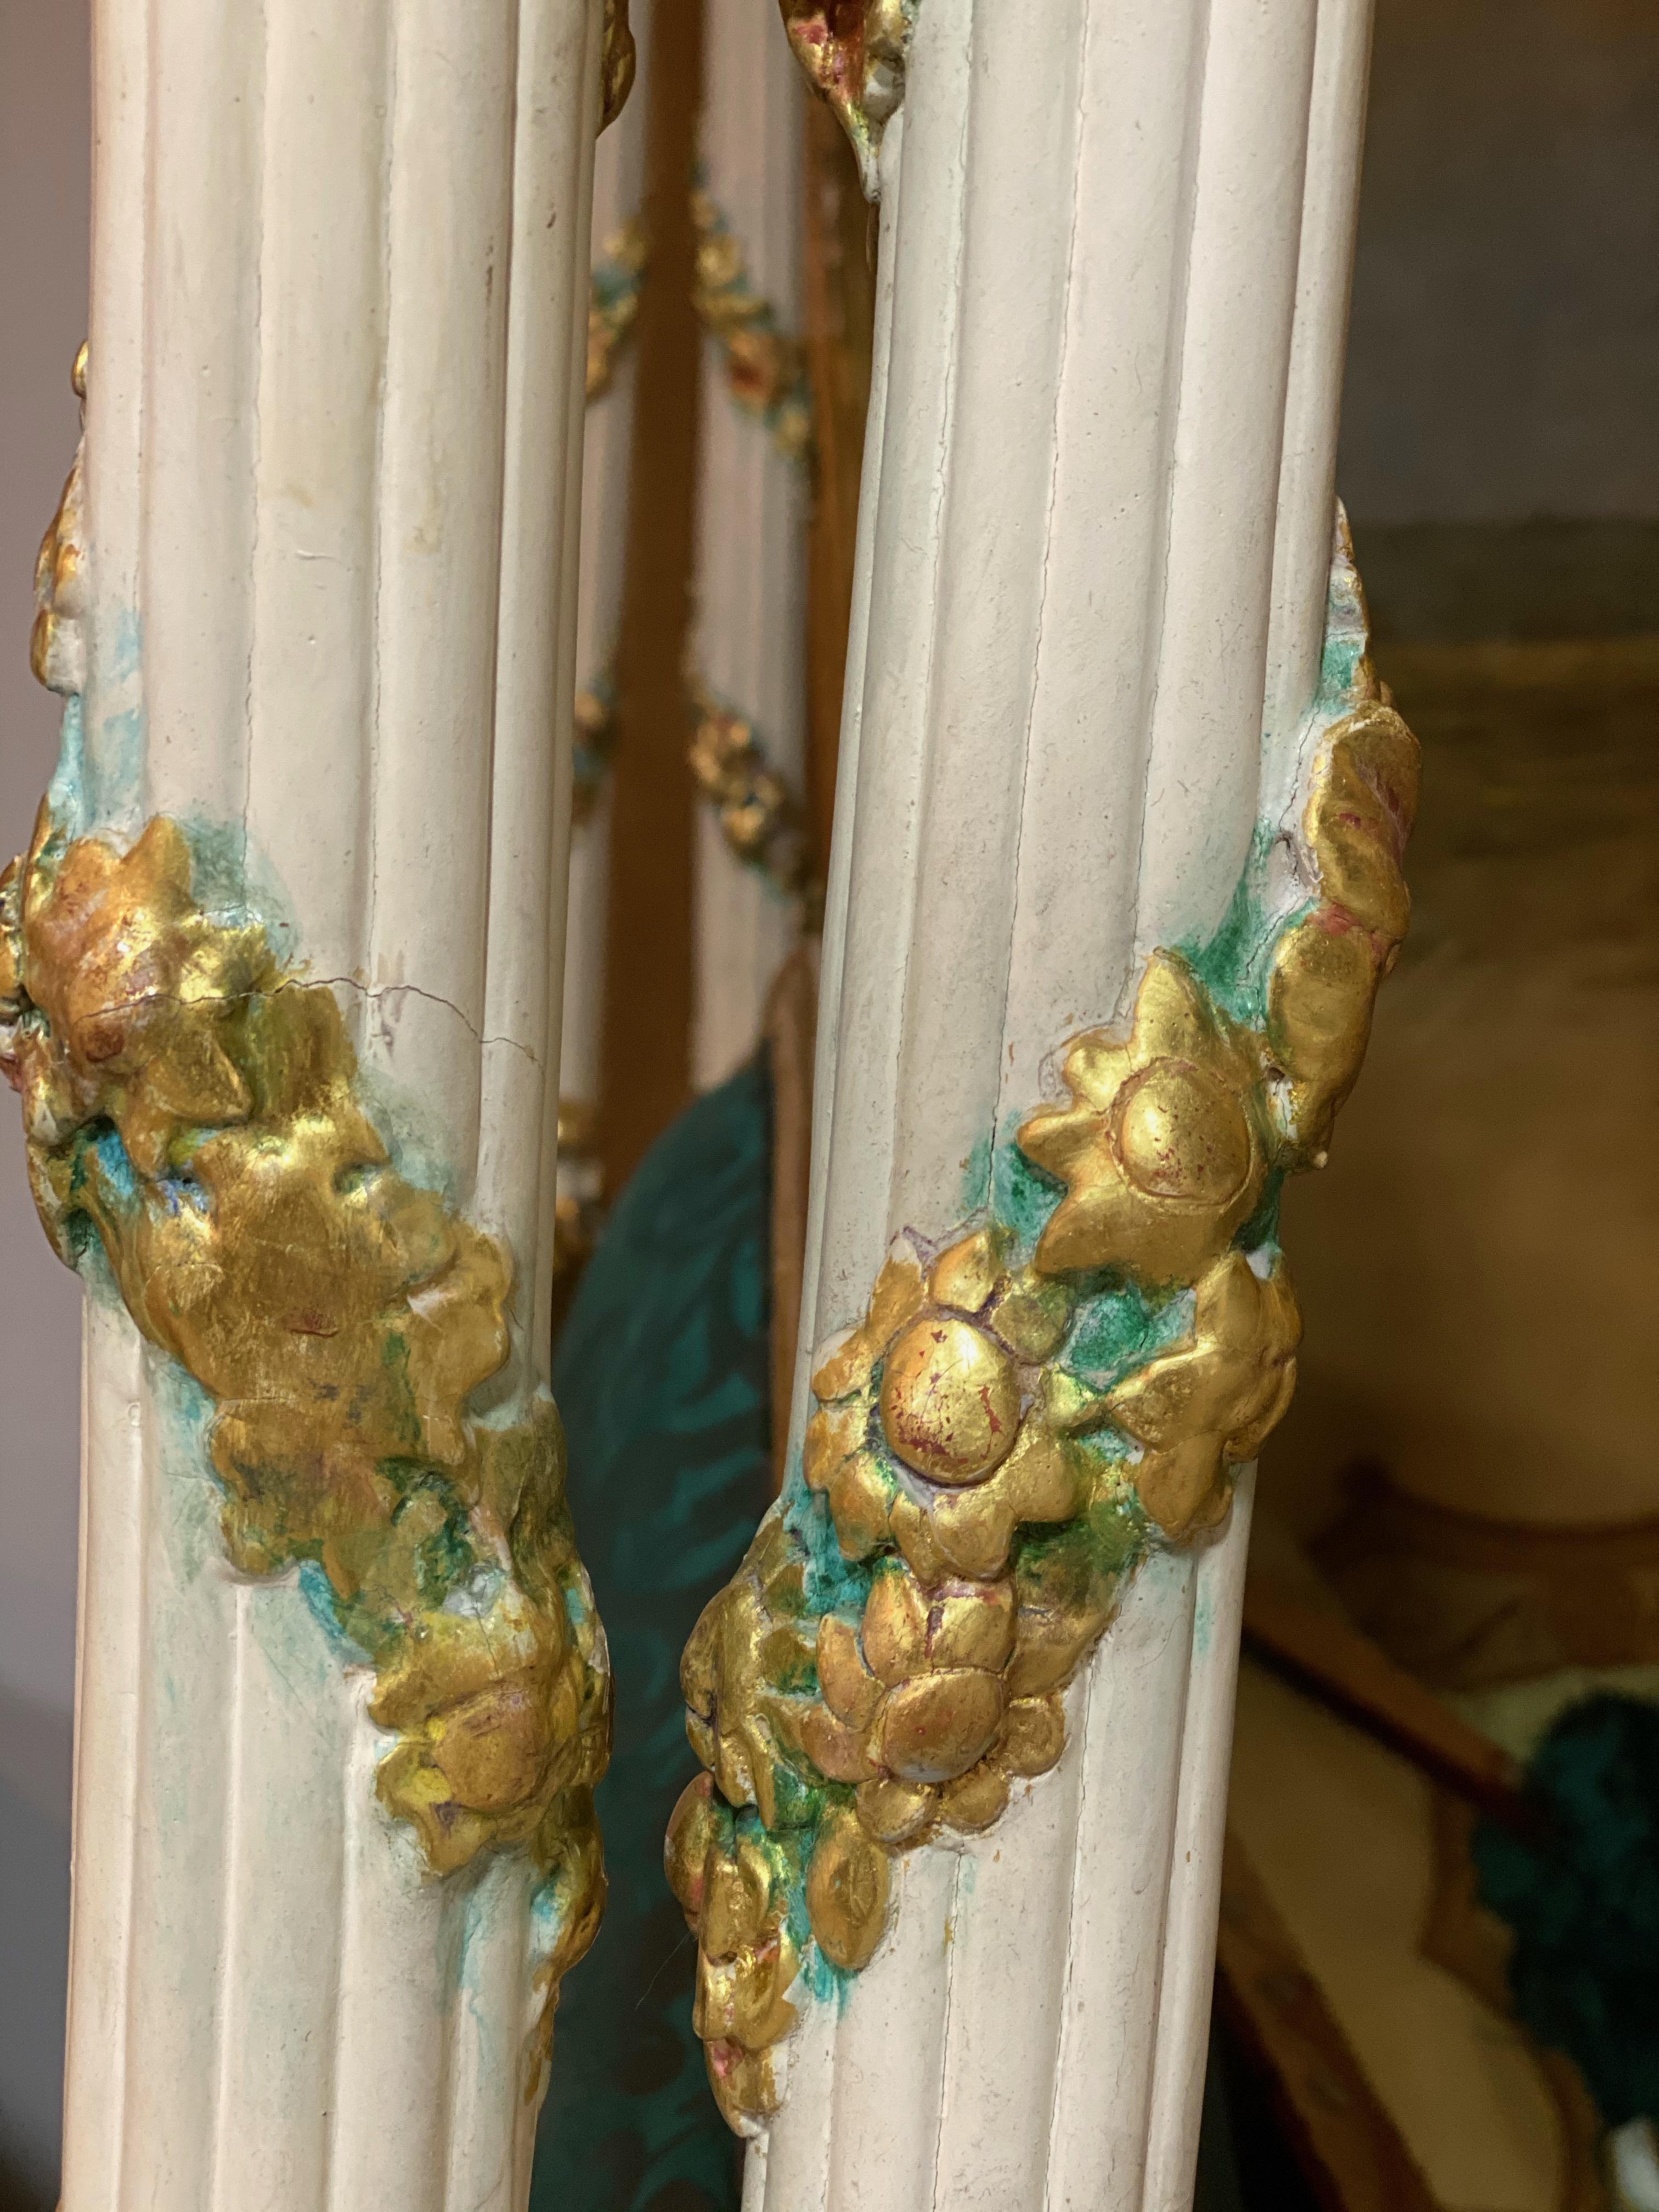 A late Louis XV white-painted, parcel-gilt and polychrome decorated lit a la polonaise, circa 1765.